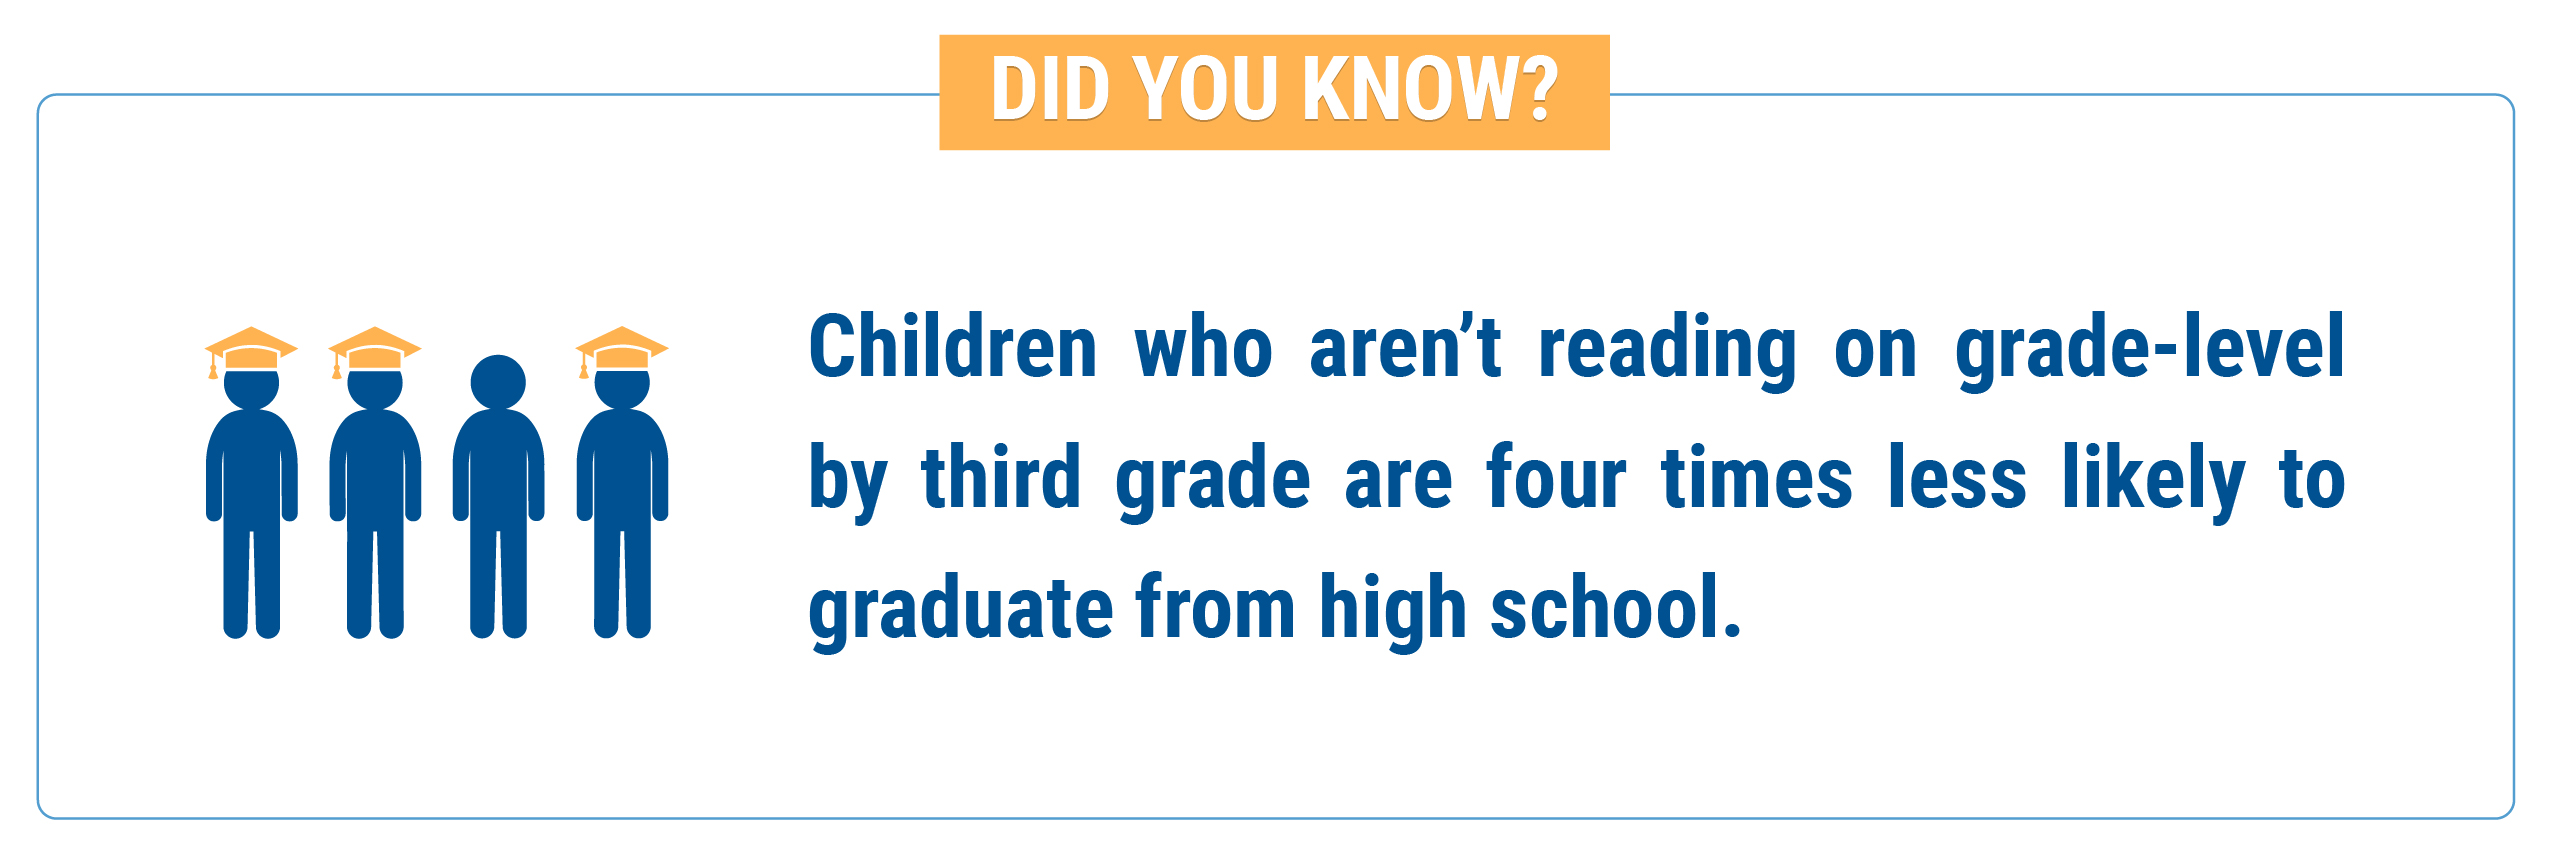 Did you know? Children who aren't reading on grade level by third grade are four times less likely to graduate from high school.